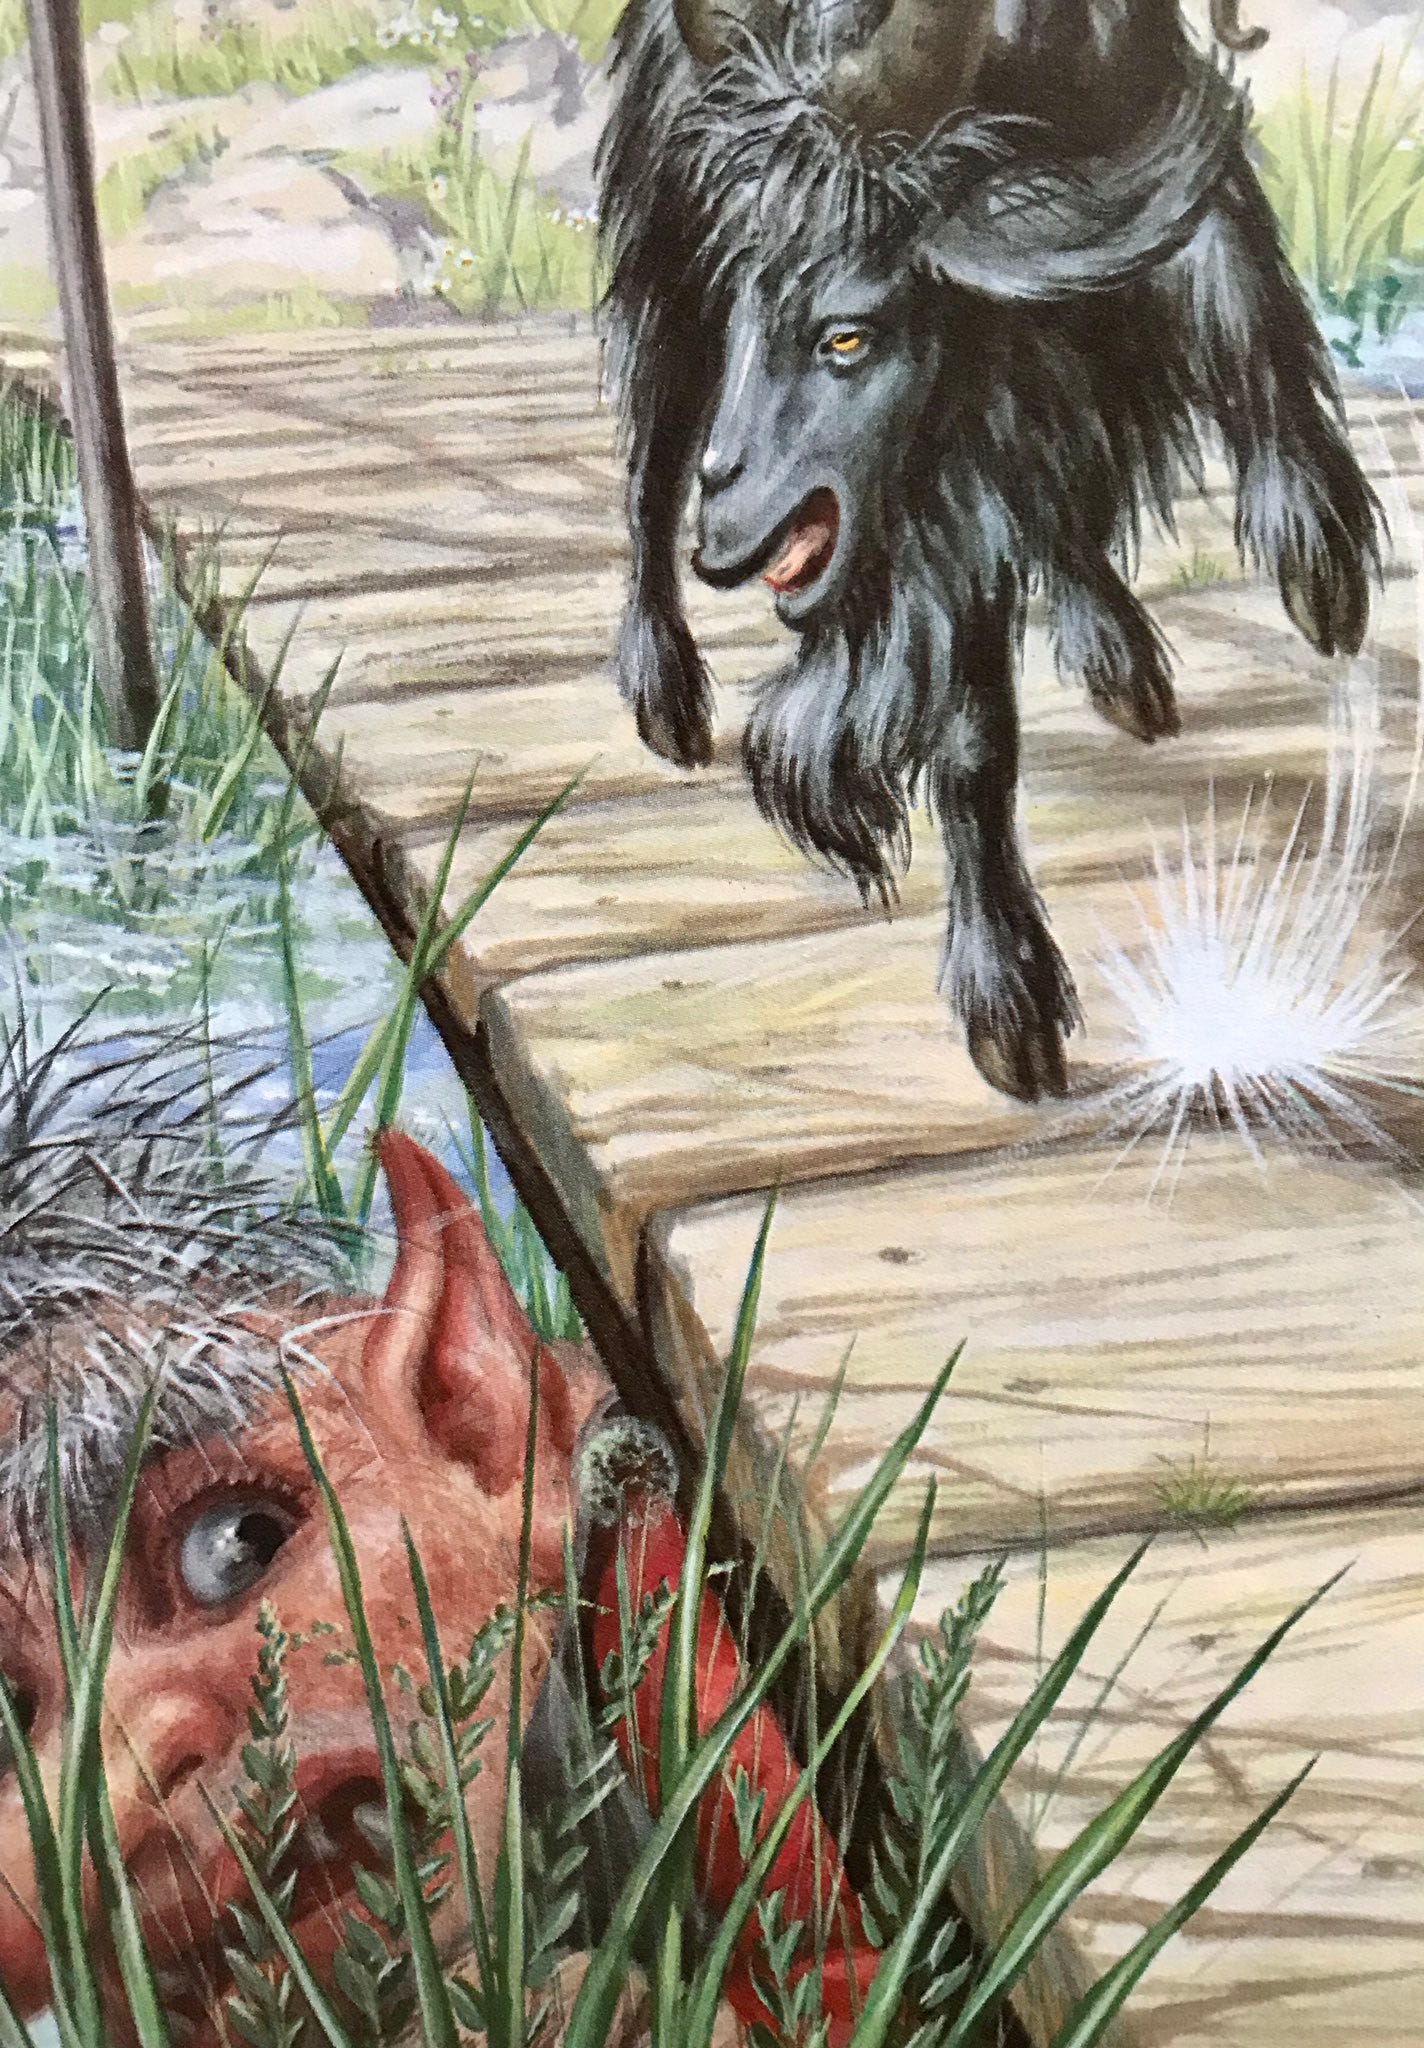 Robert Lumley’s artwork for Ladybird book’s version of The Three Billy Goats Gruff Troll now looks fearful of black goat over his bridge